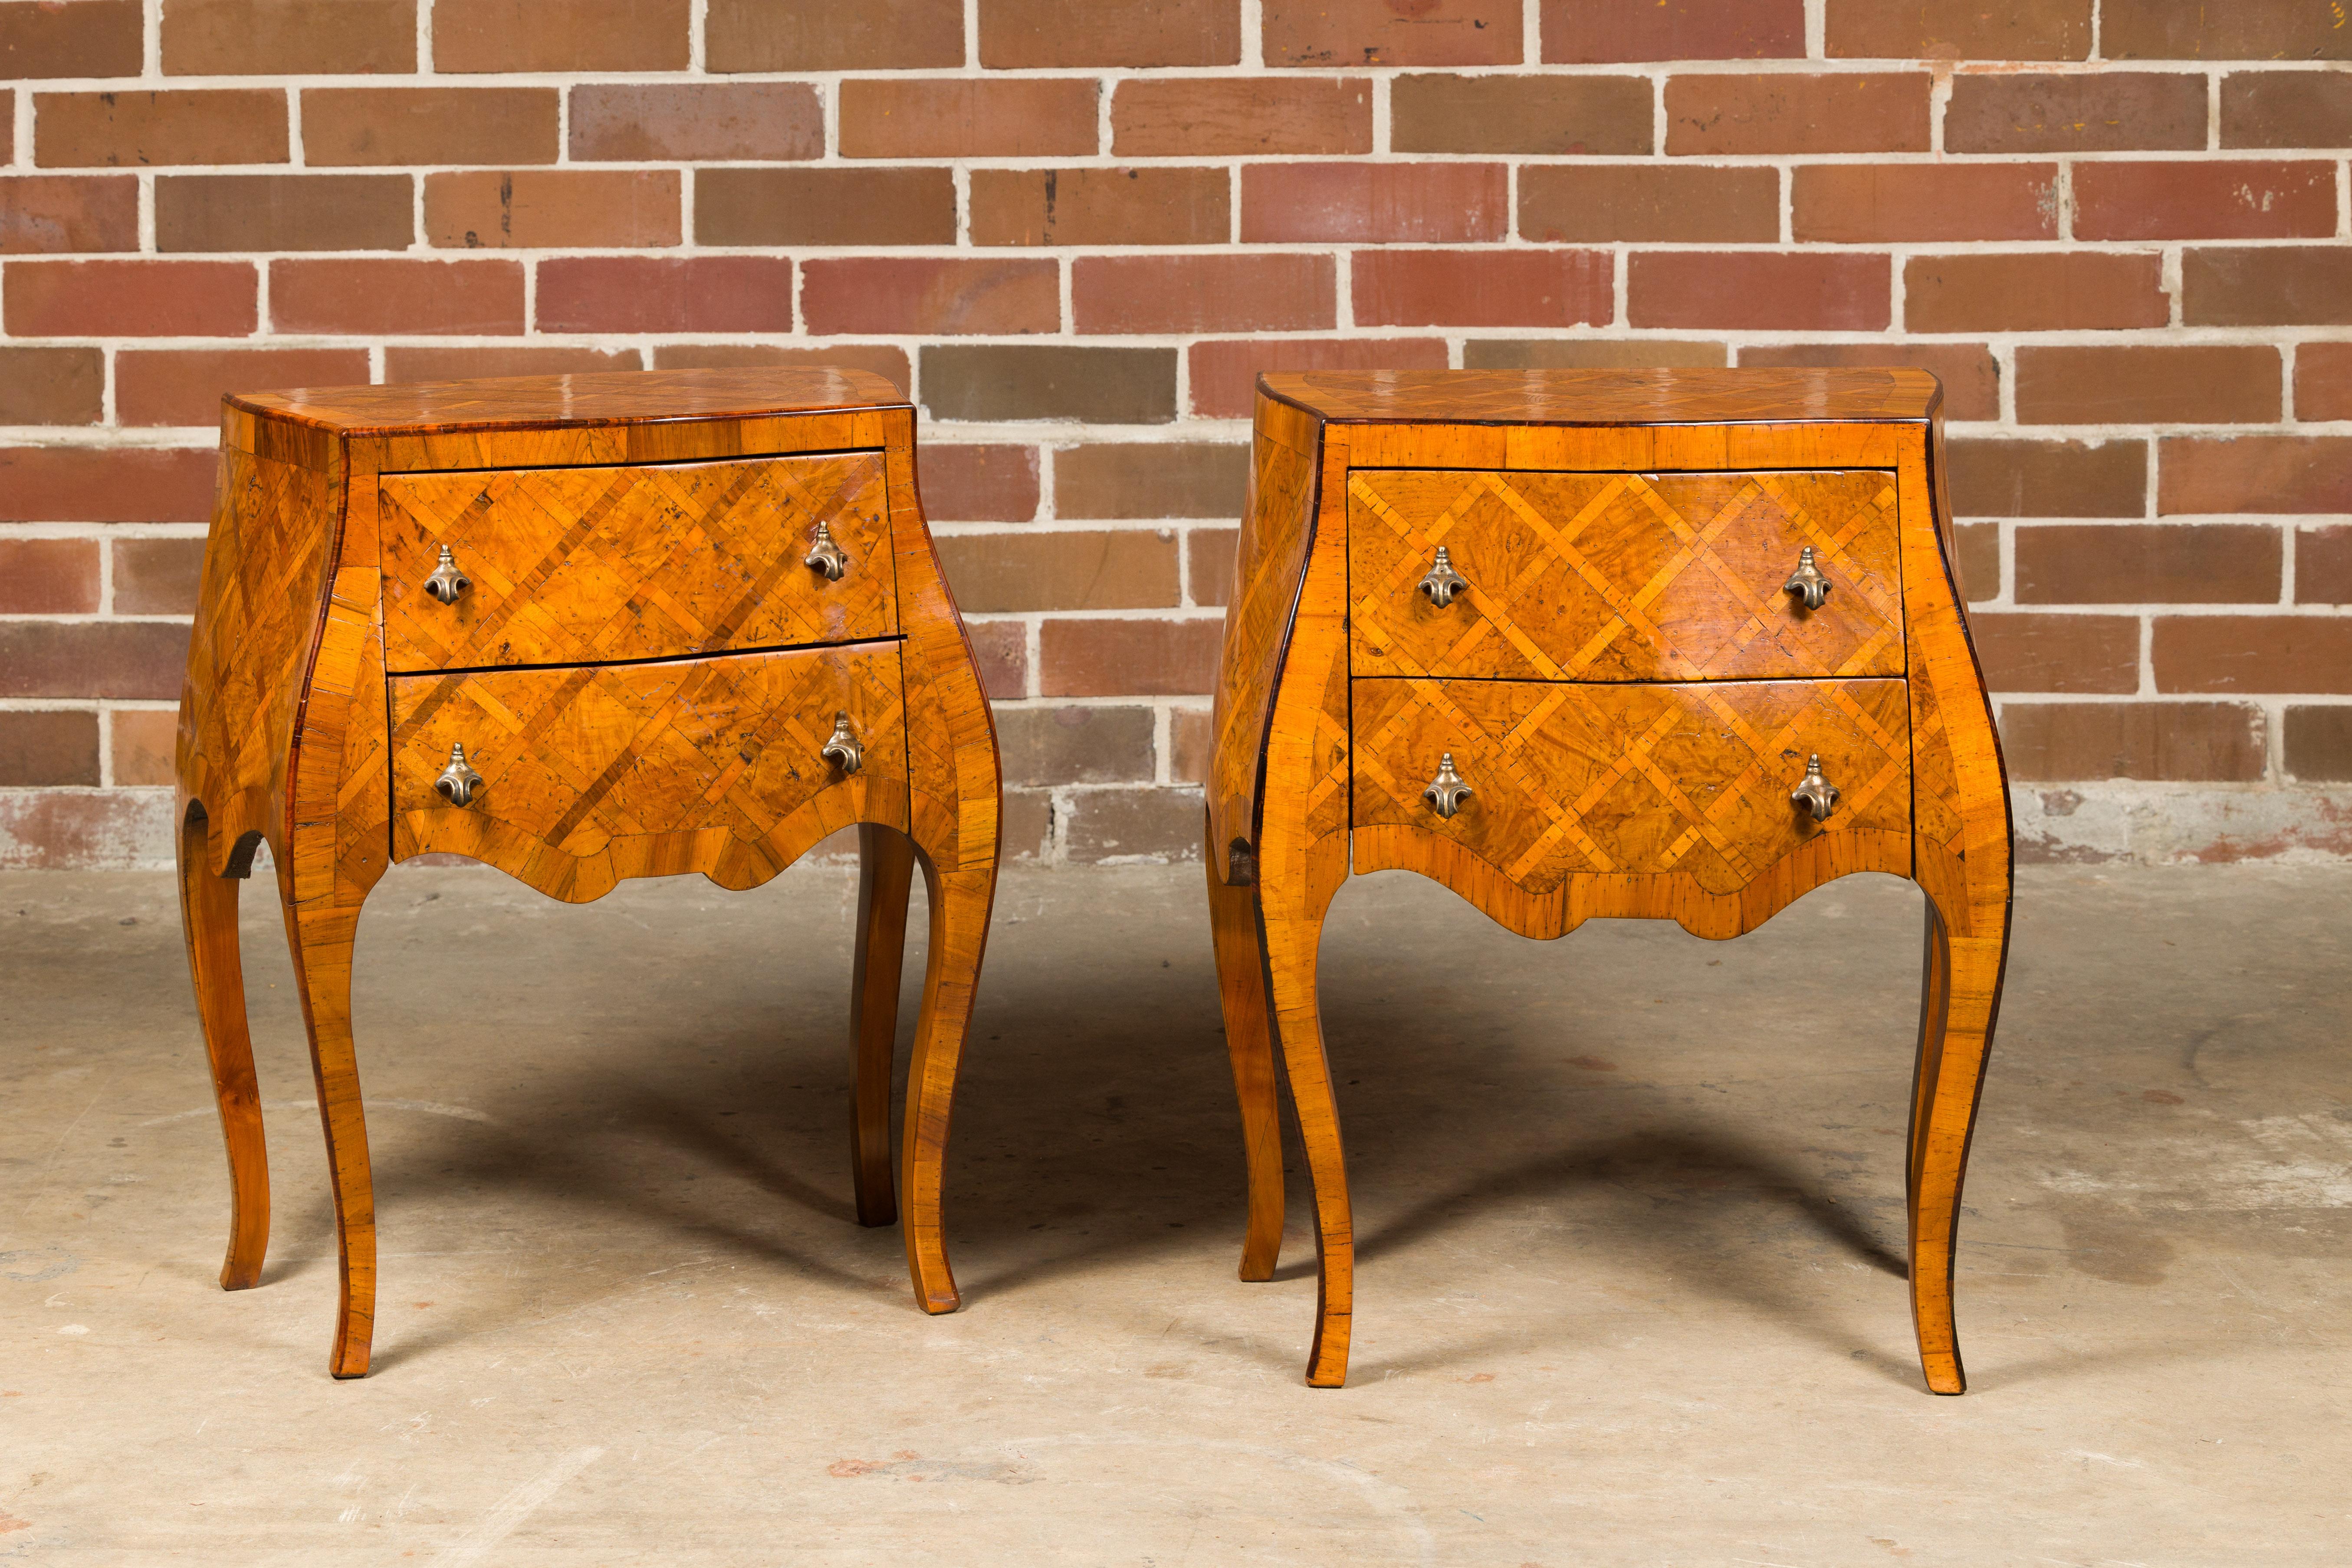 Carved Italian Rococo Style Burl Wood Marquetry Bedside Chests with Cabriole Legs For Sale